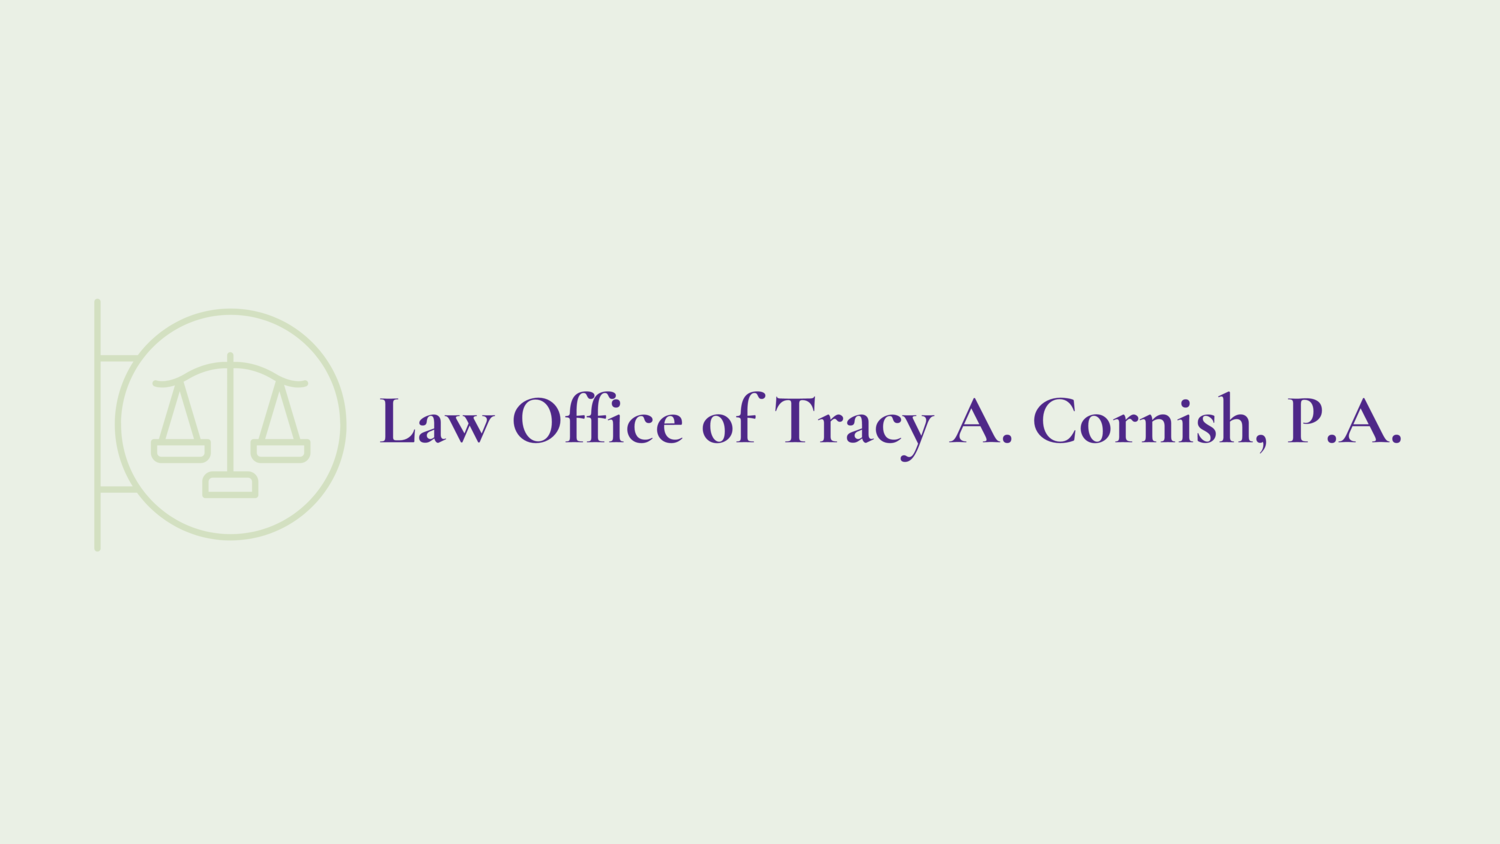 Law Office of Tracy A. Cornish, P.A.